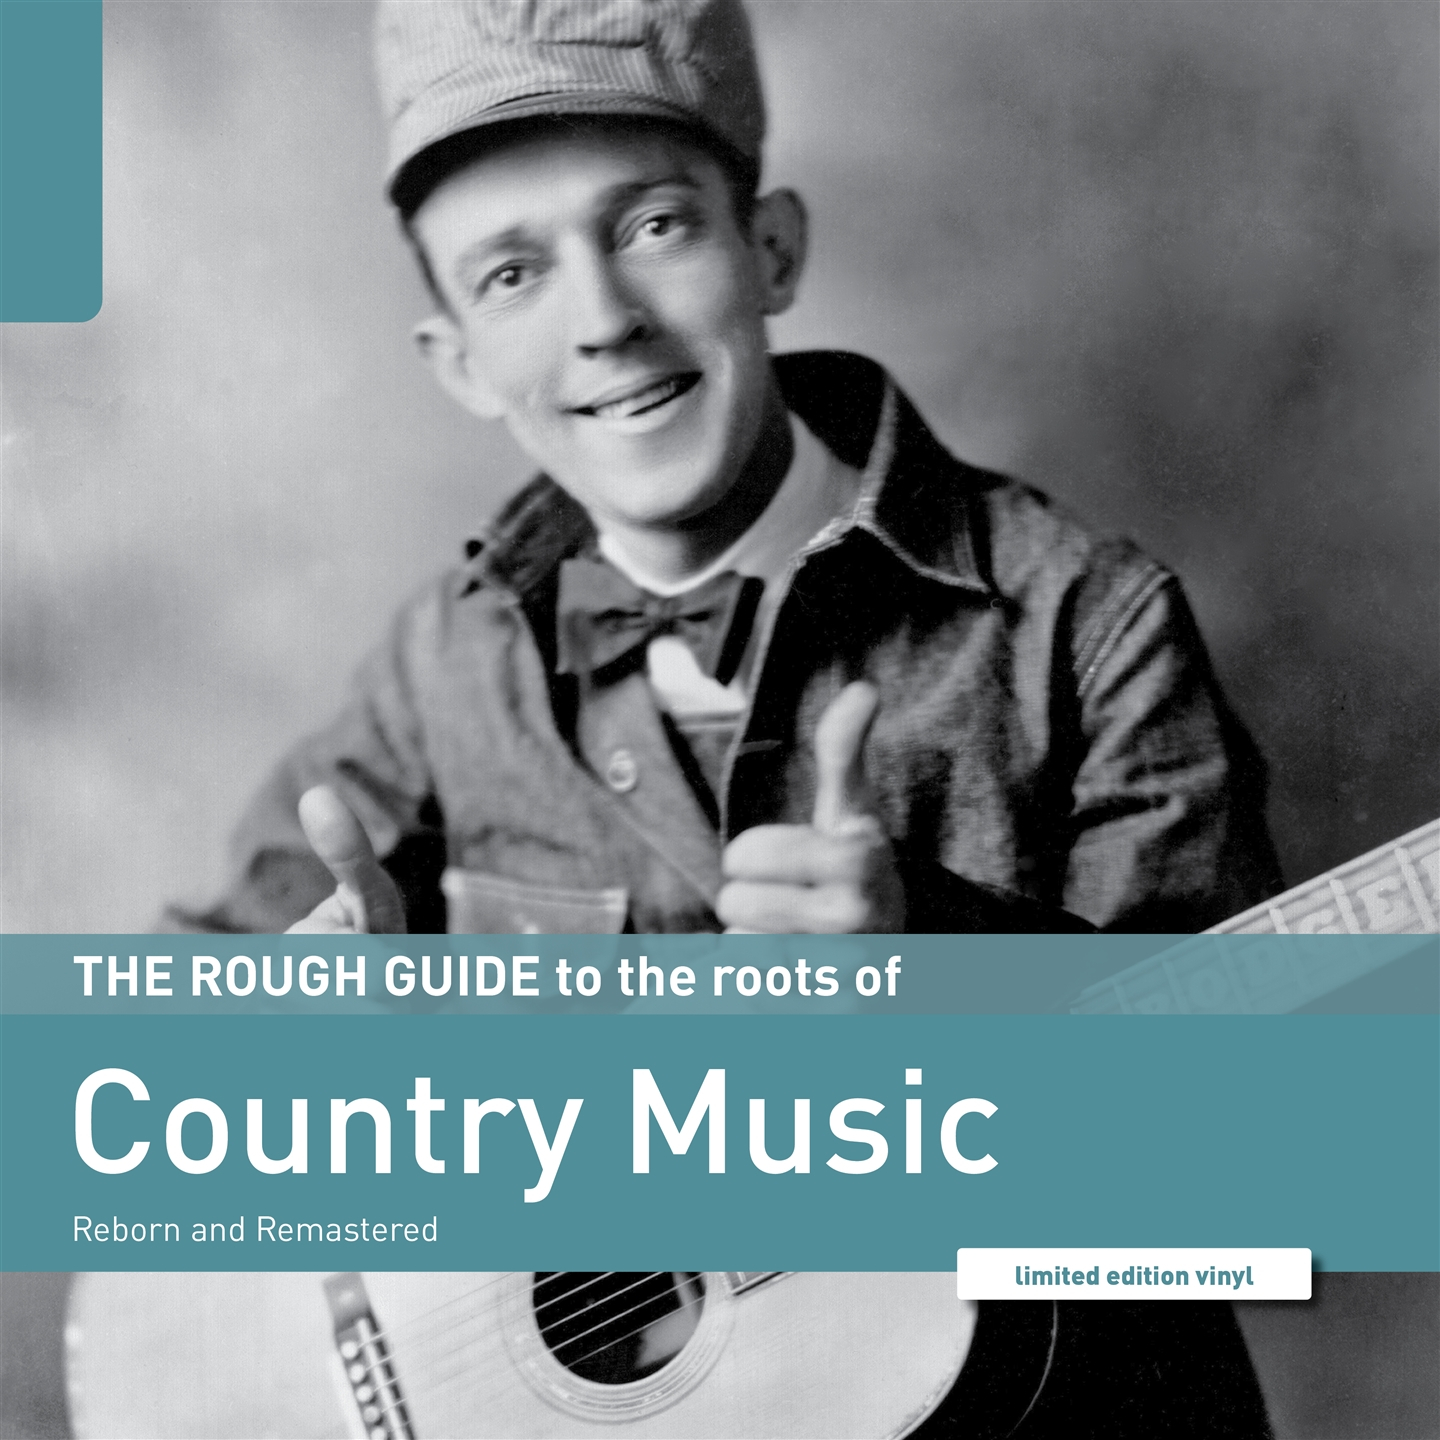 THE ROUGH GUIDE TO THE ROOTS OF COUNTRY MUSIC [LP]